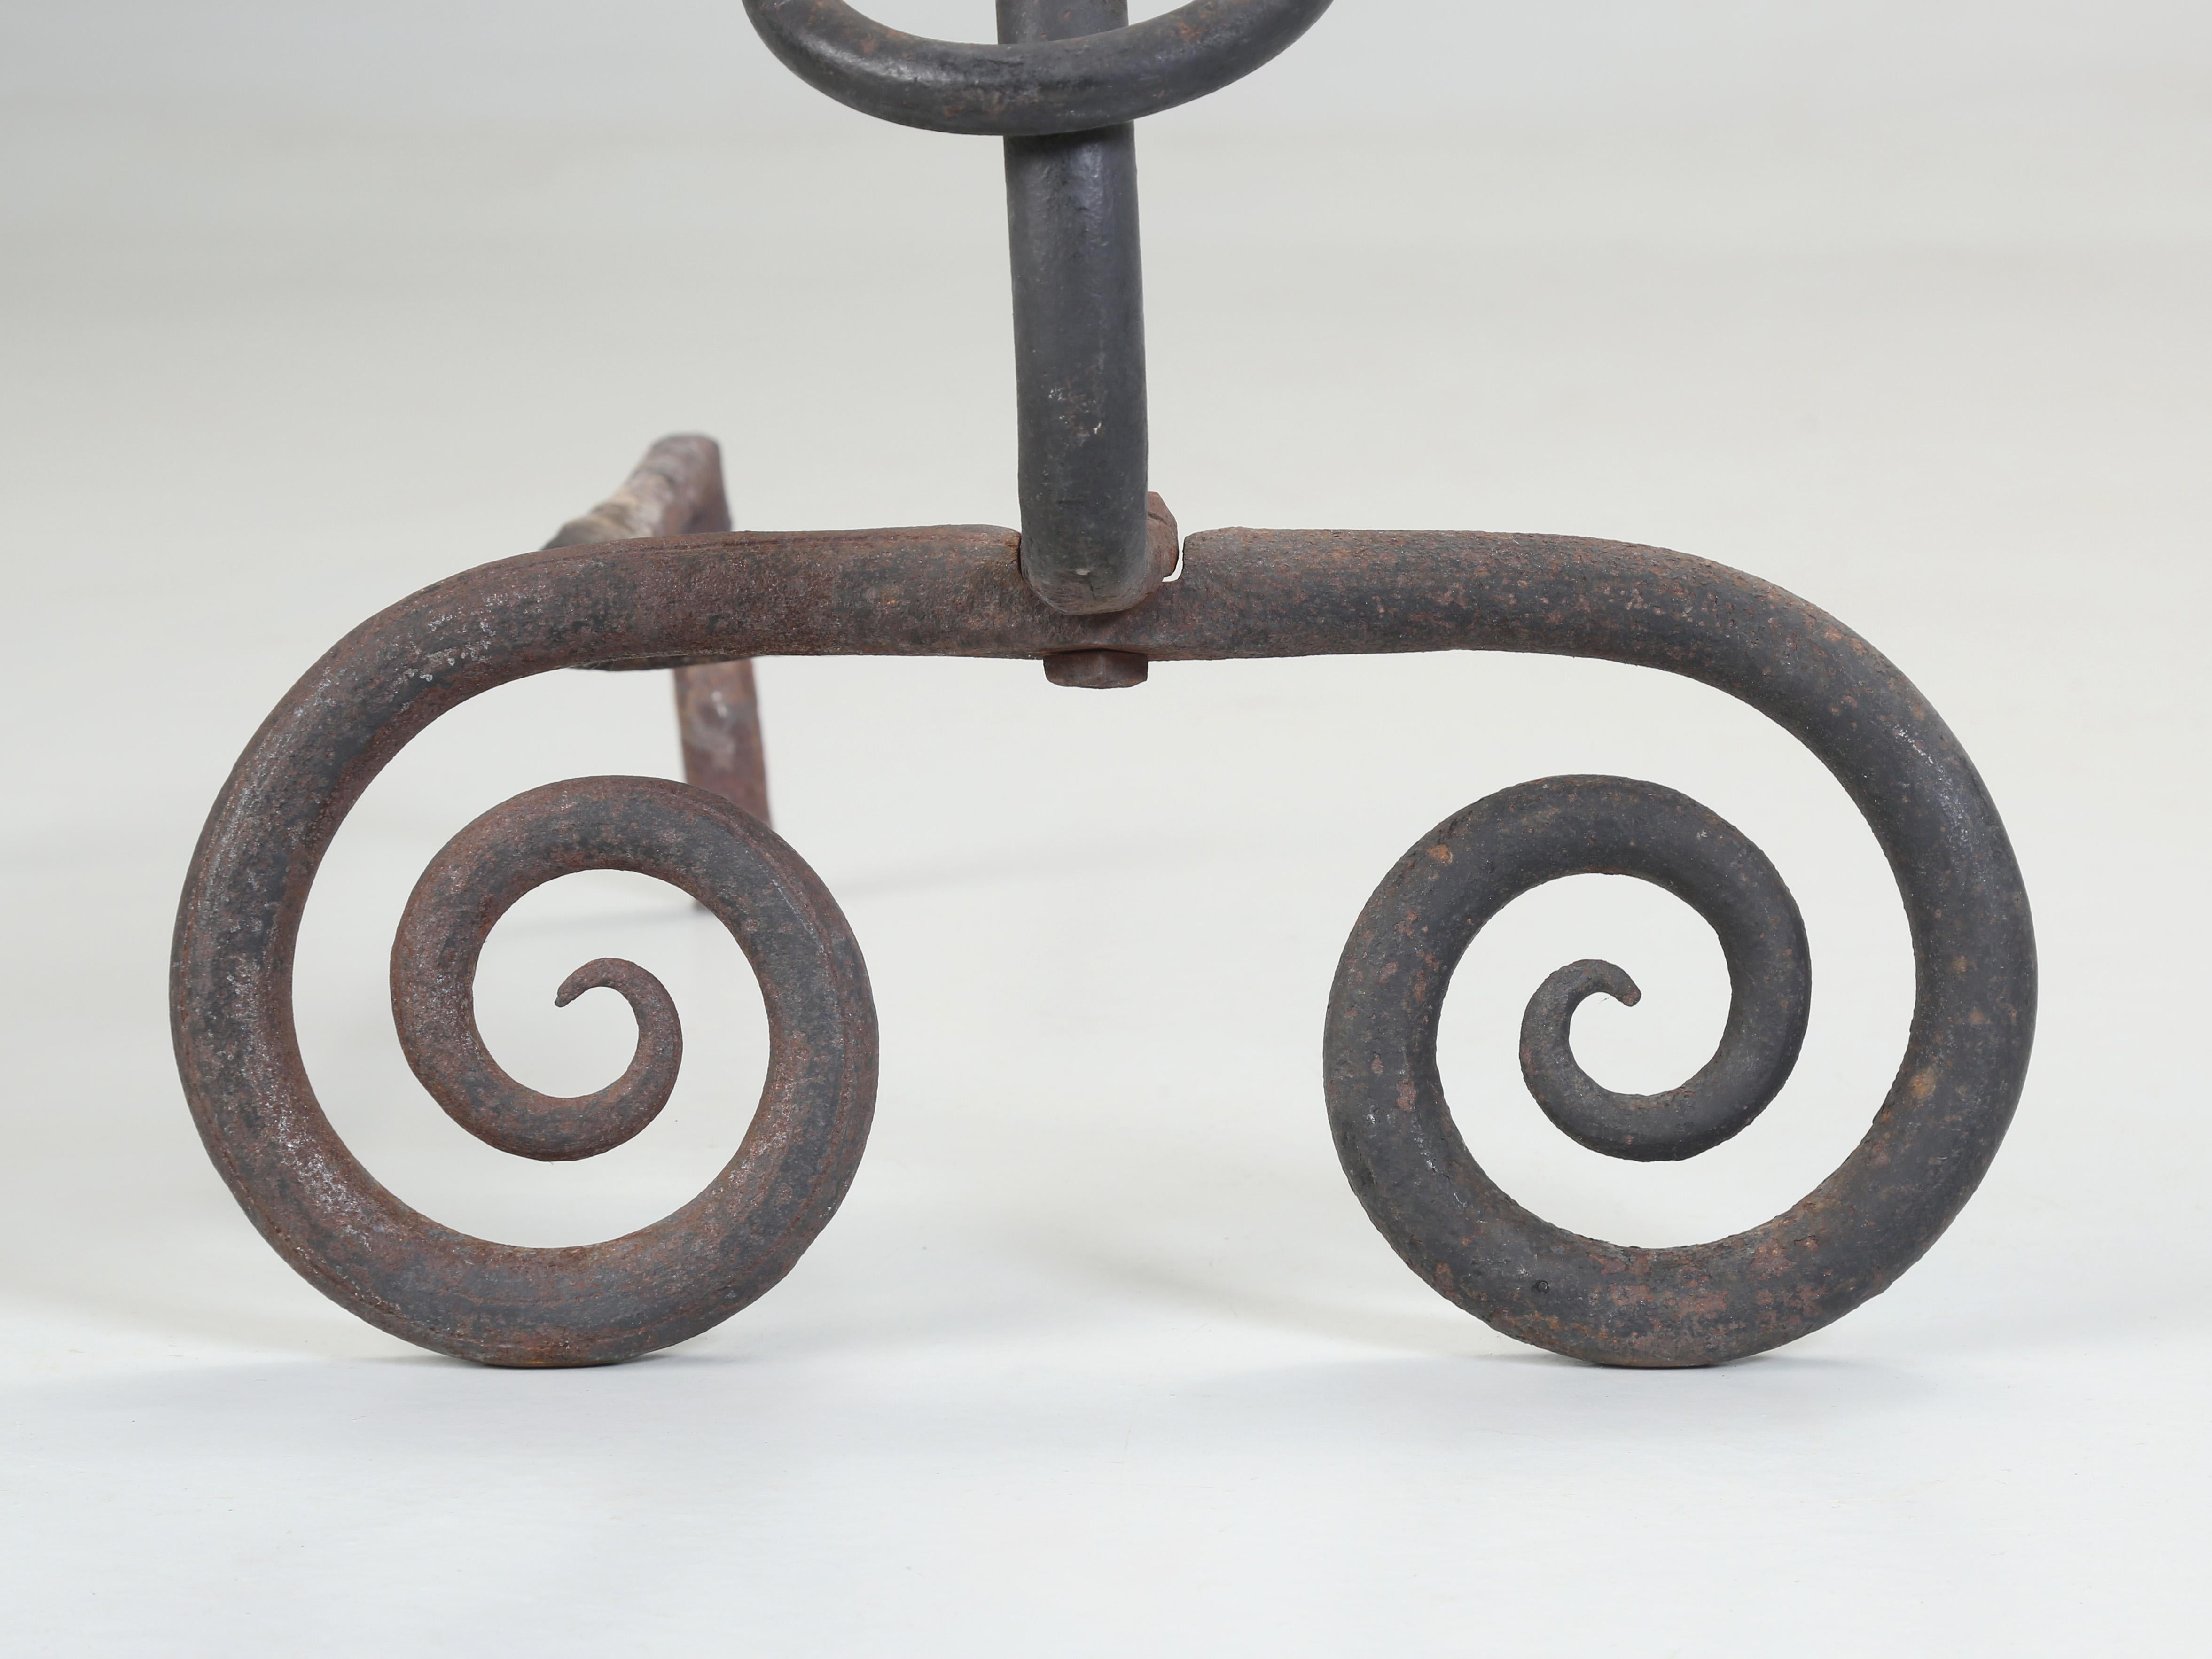 Wrought Iron Fireplace Andirons. Modernist Curled Form with Sphere Top c1940's For Sale 6